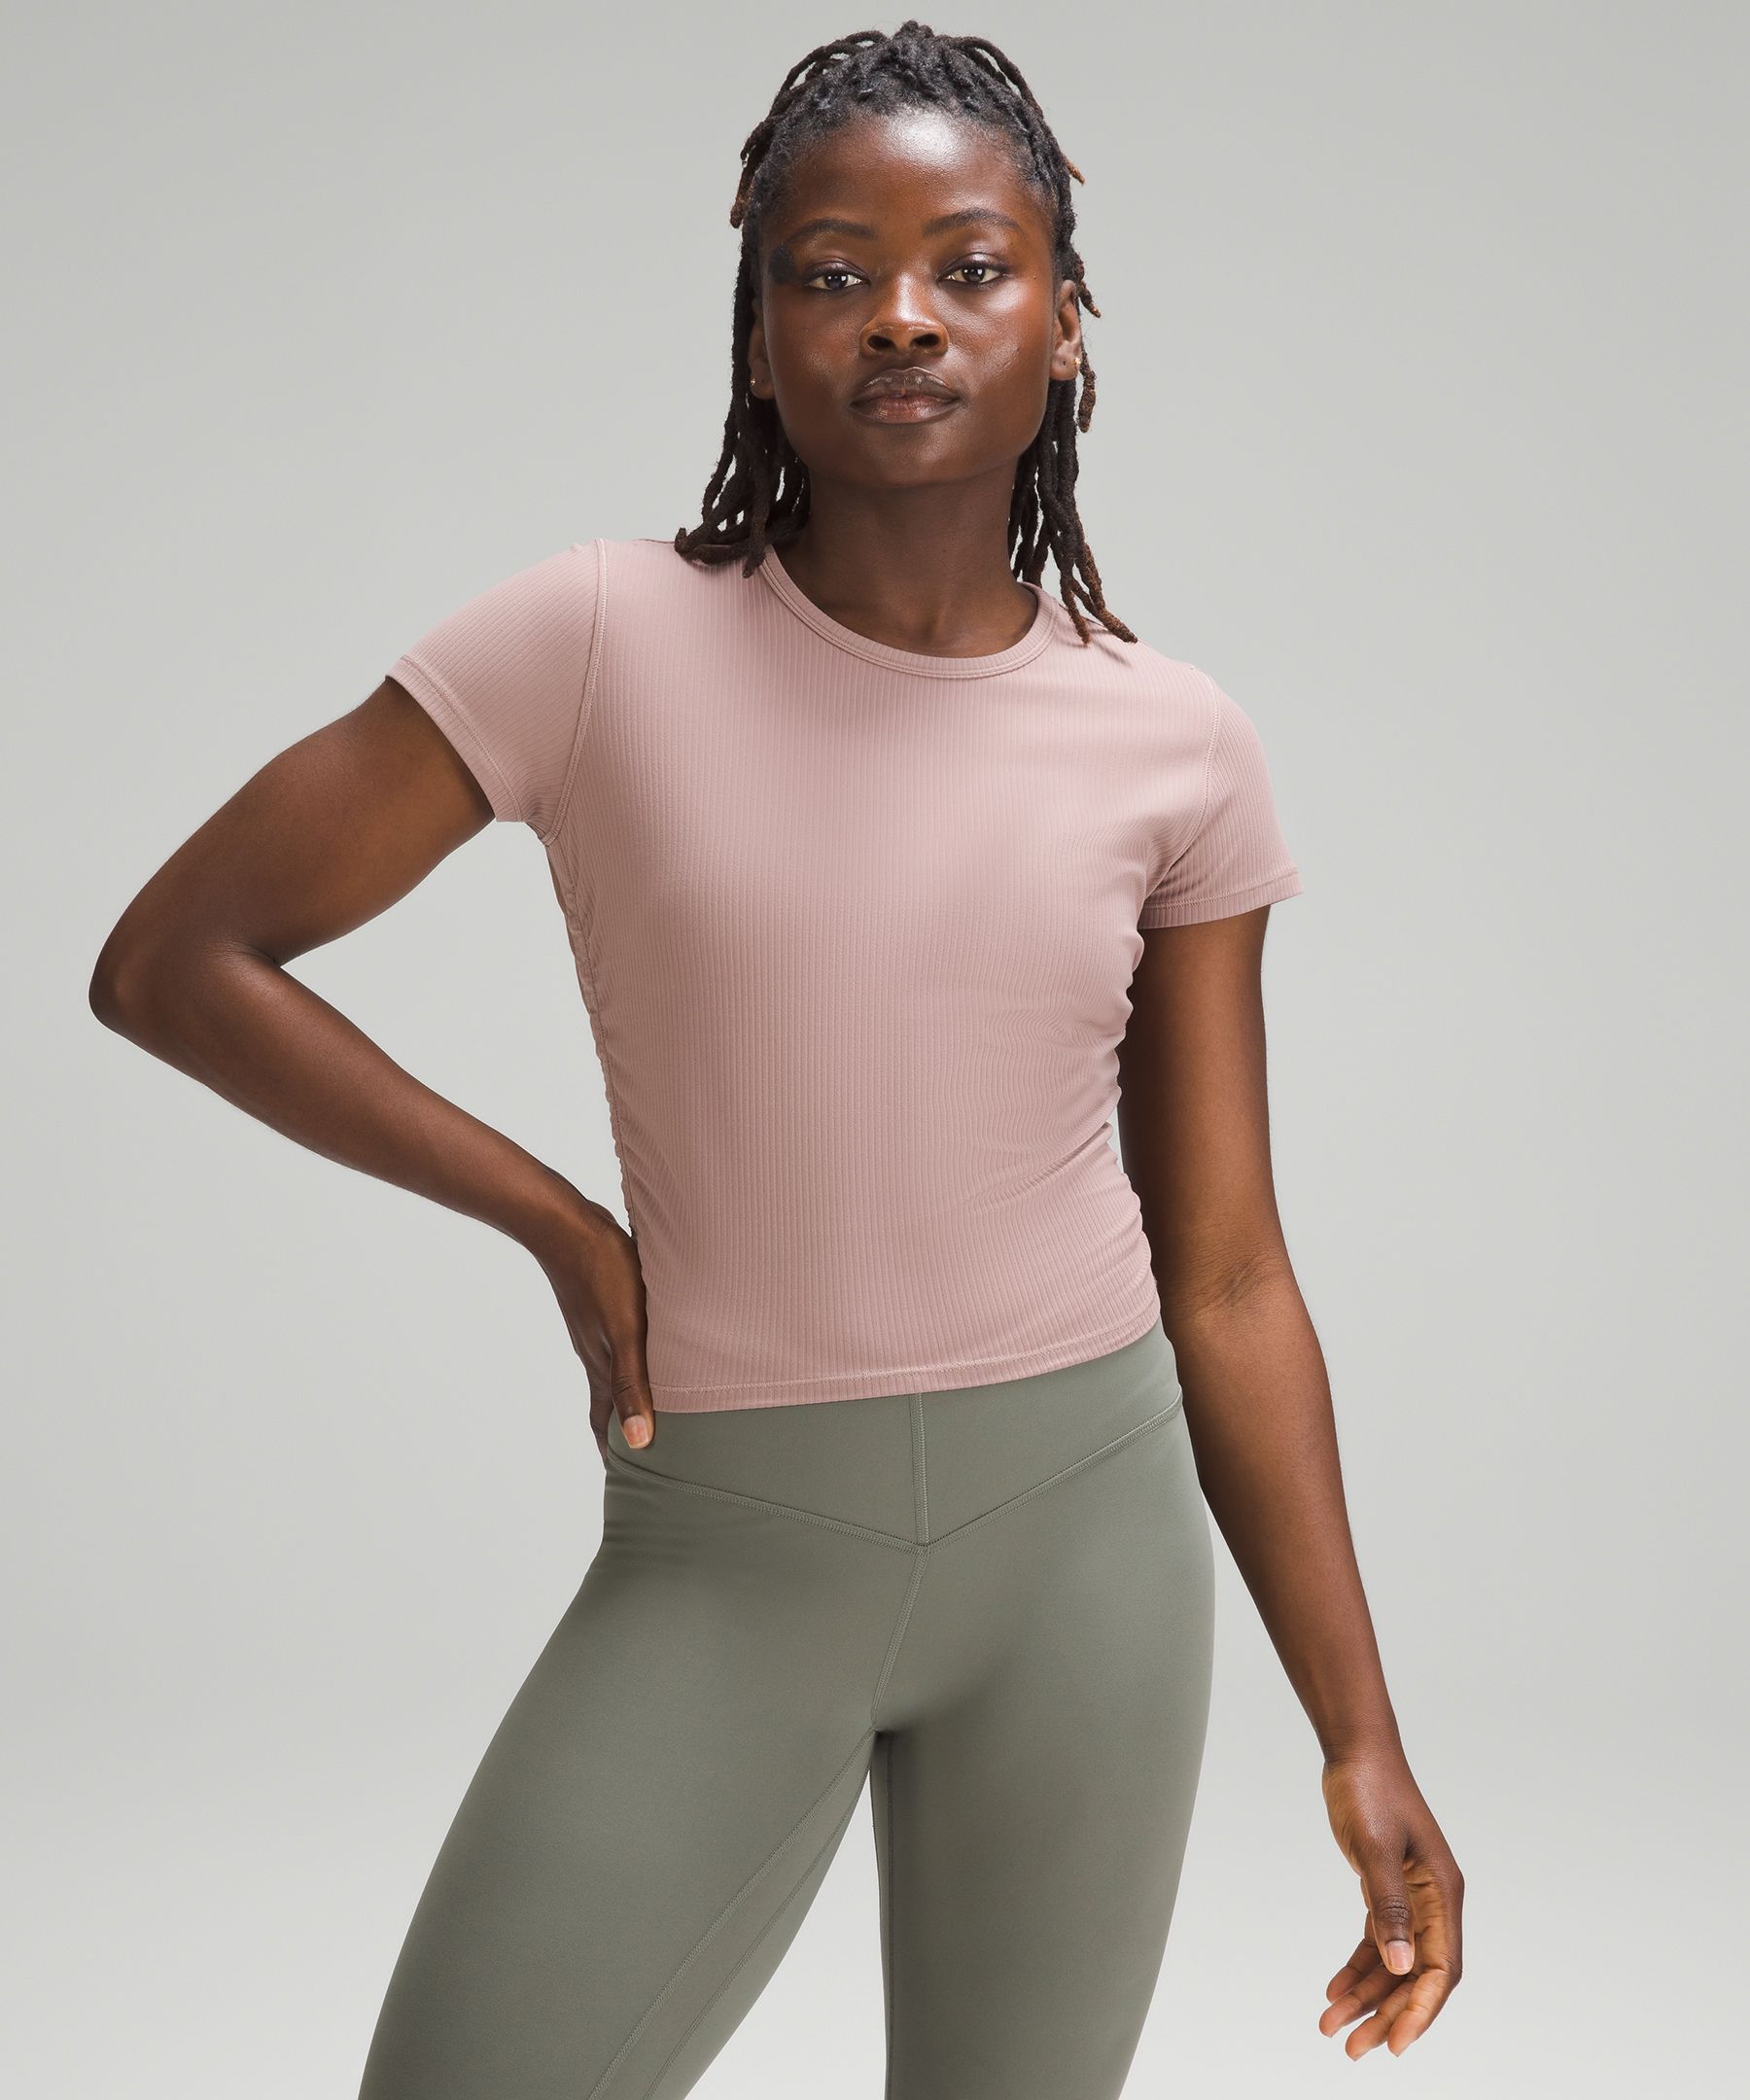 Lululemon Pink Taupe Align Leggings Size 2 - $49 (51% Off Retail) - From  Emily